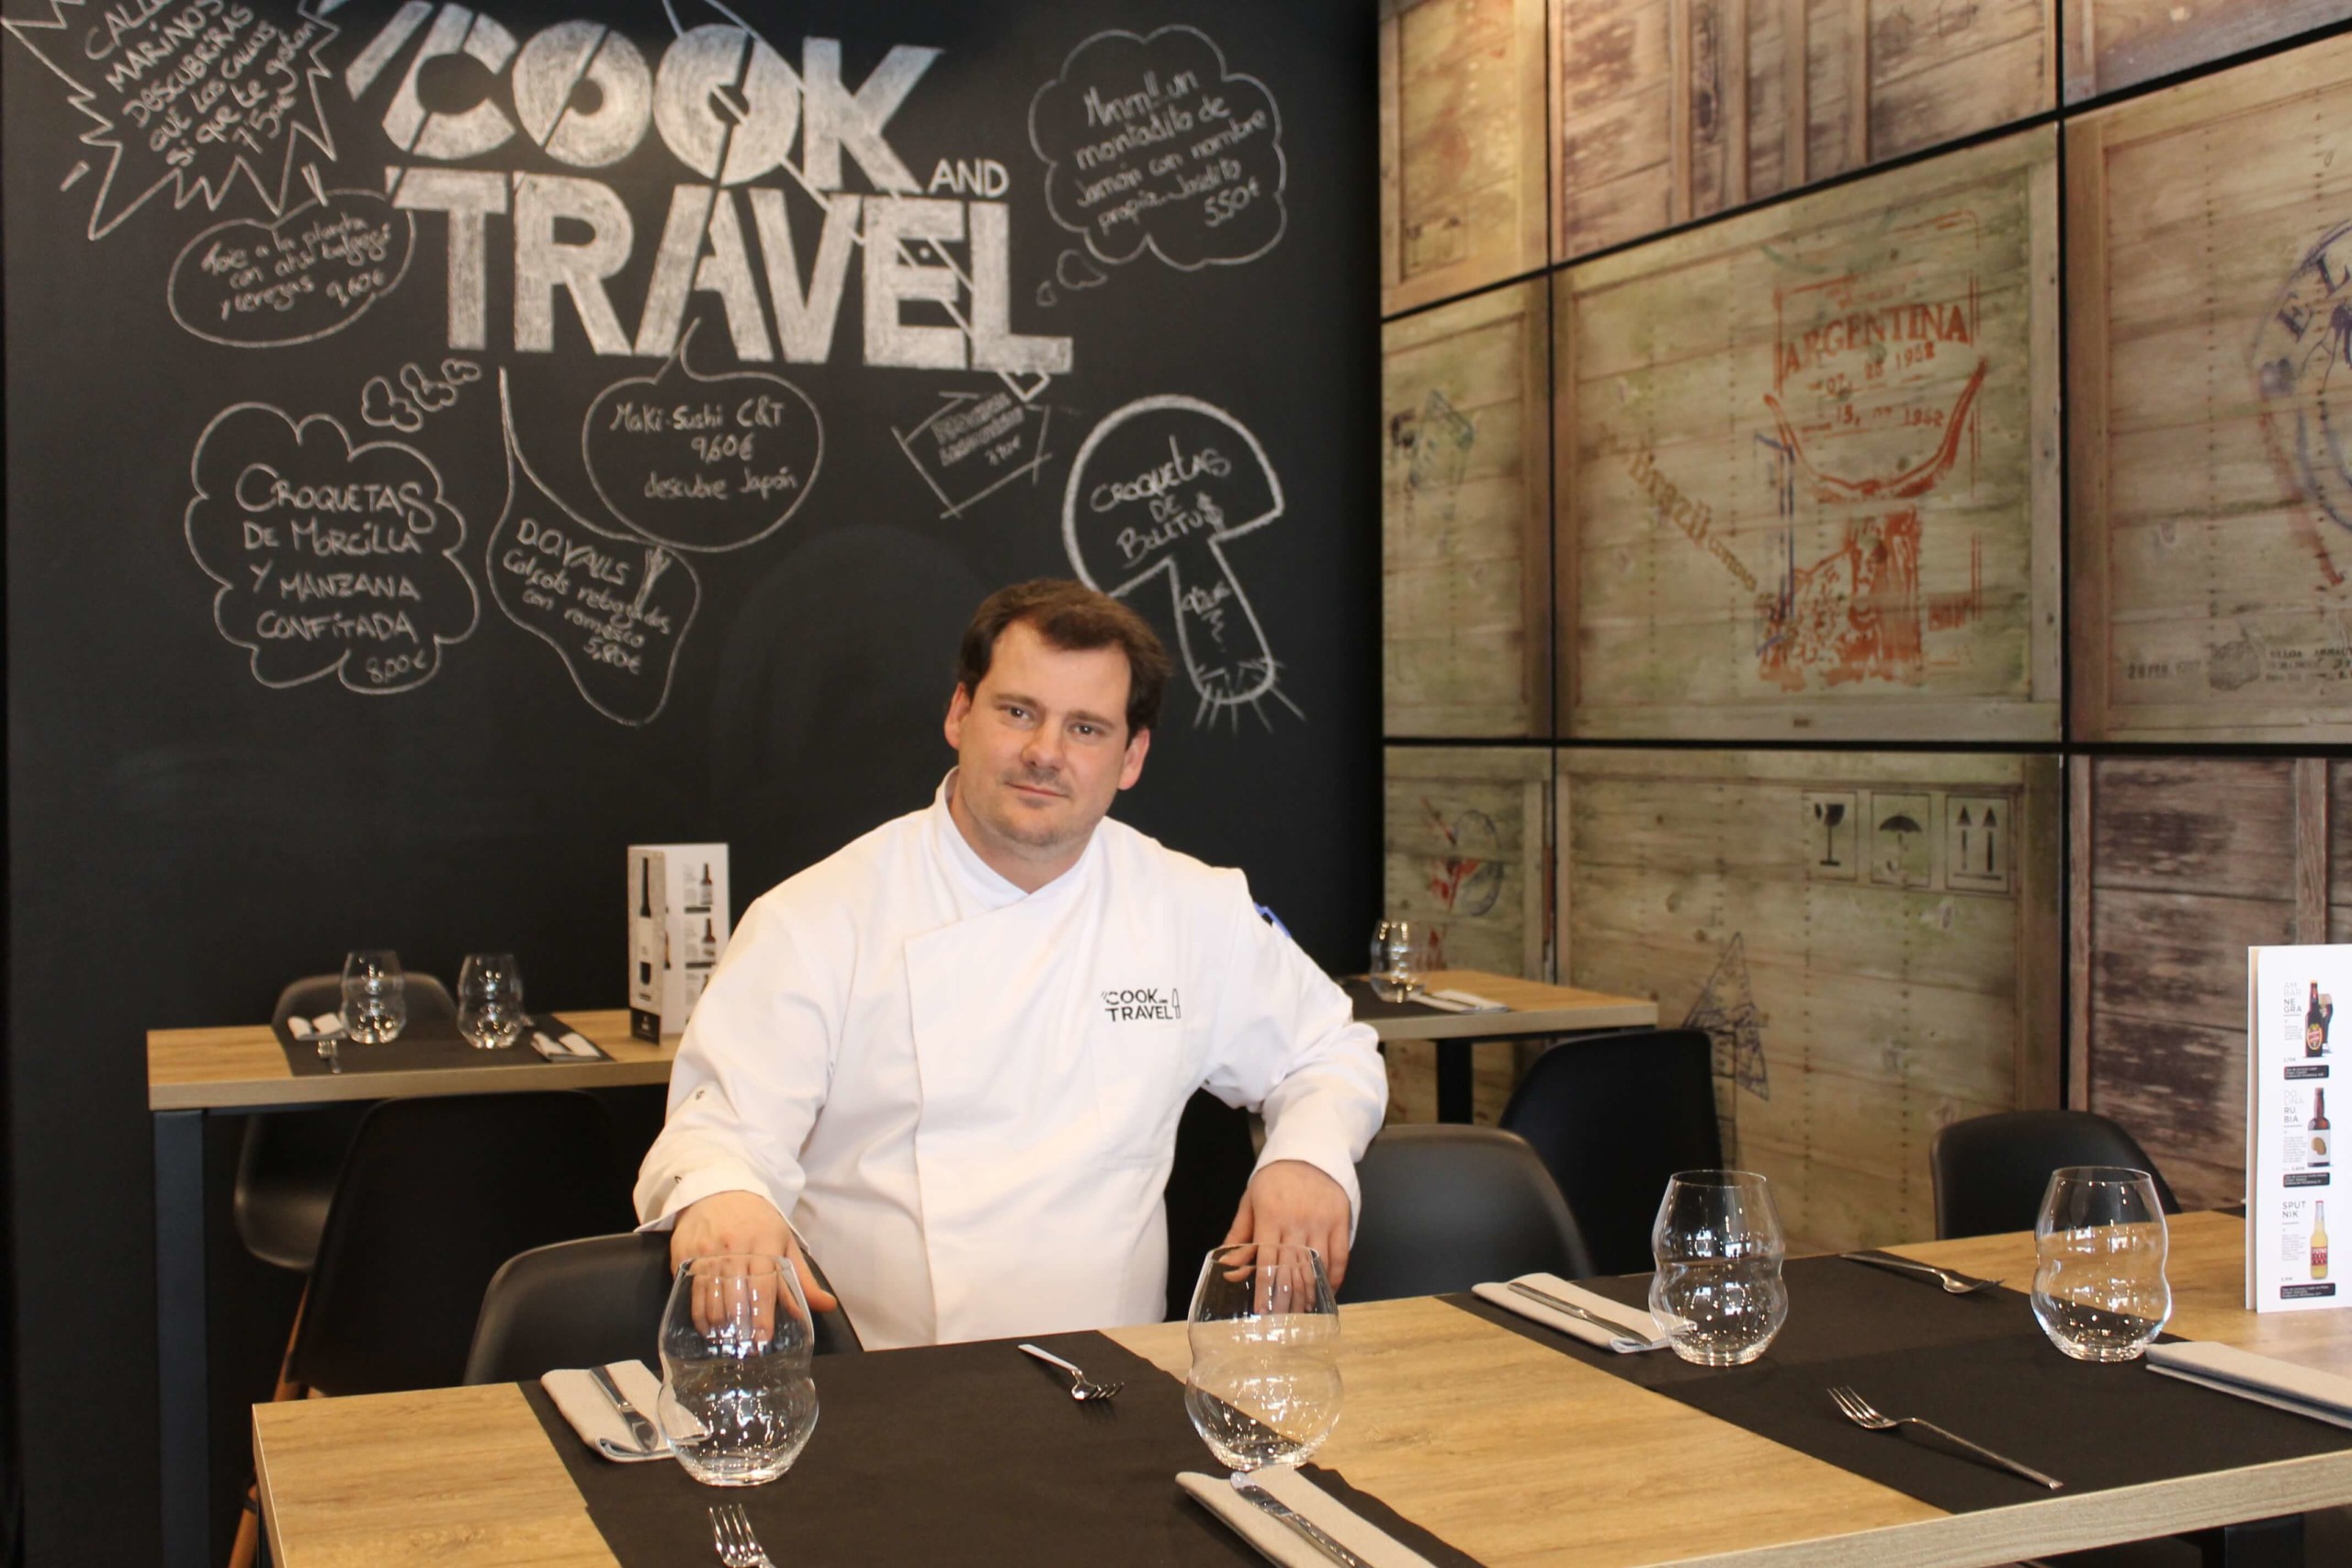 COOK AND TRAVEL | Salou